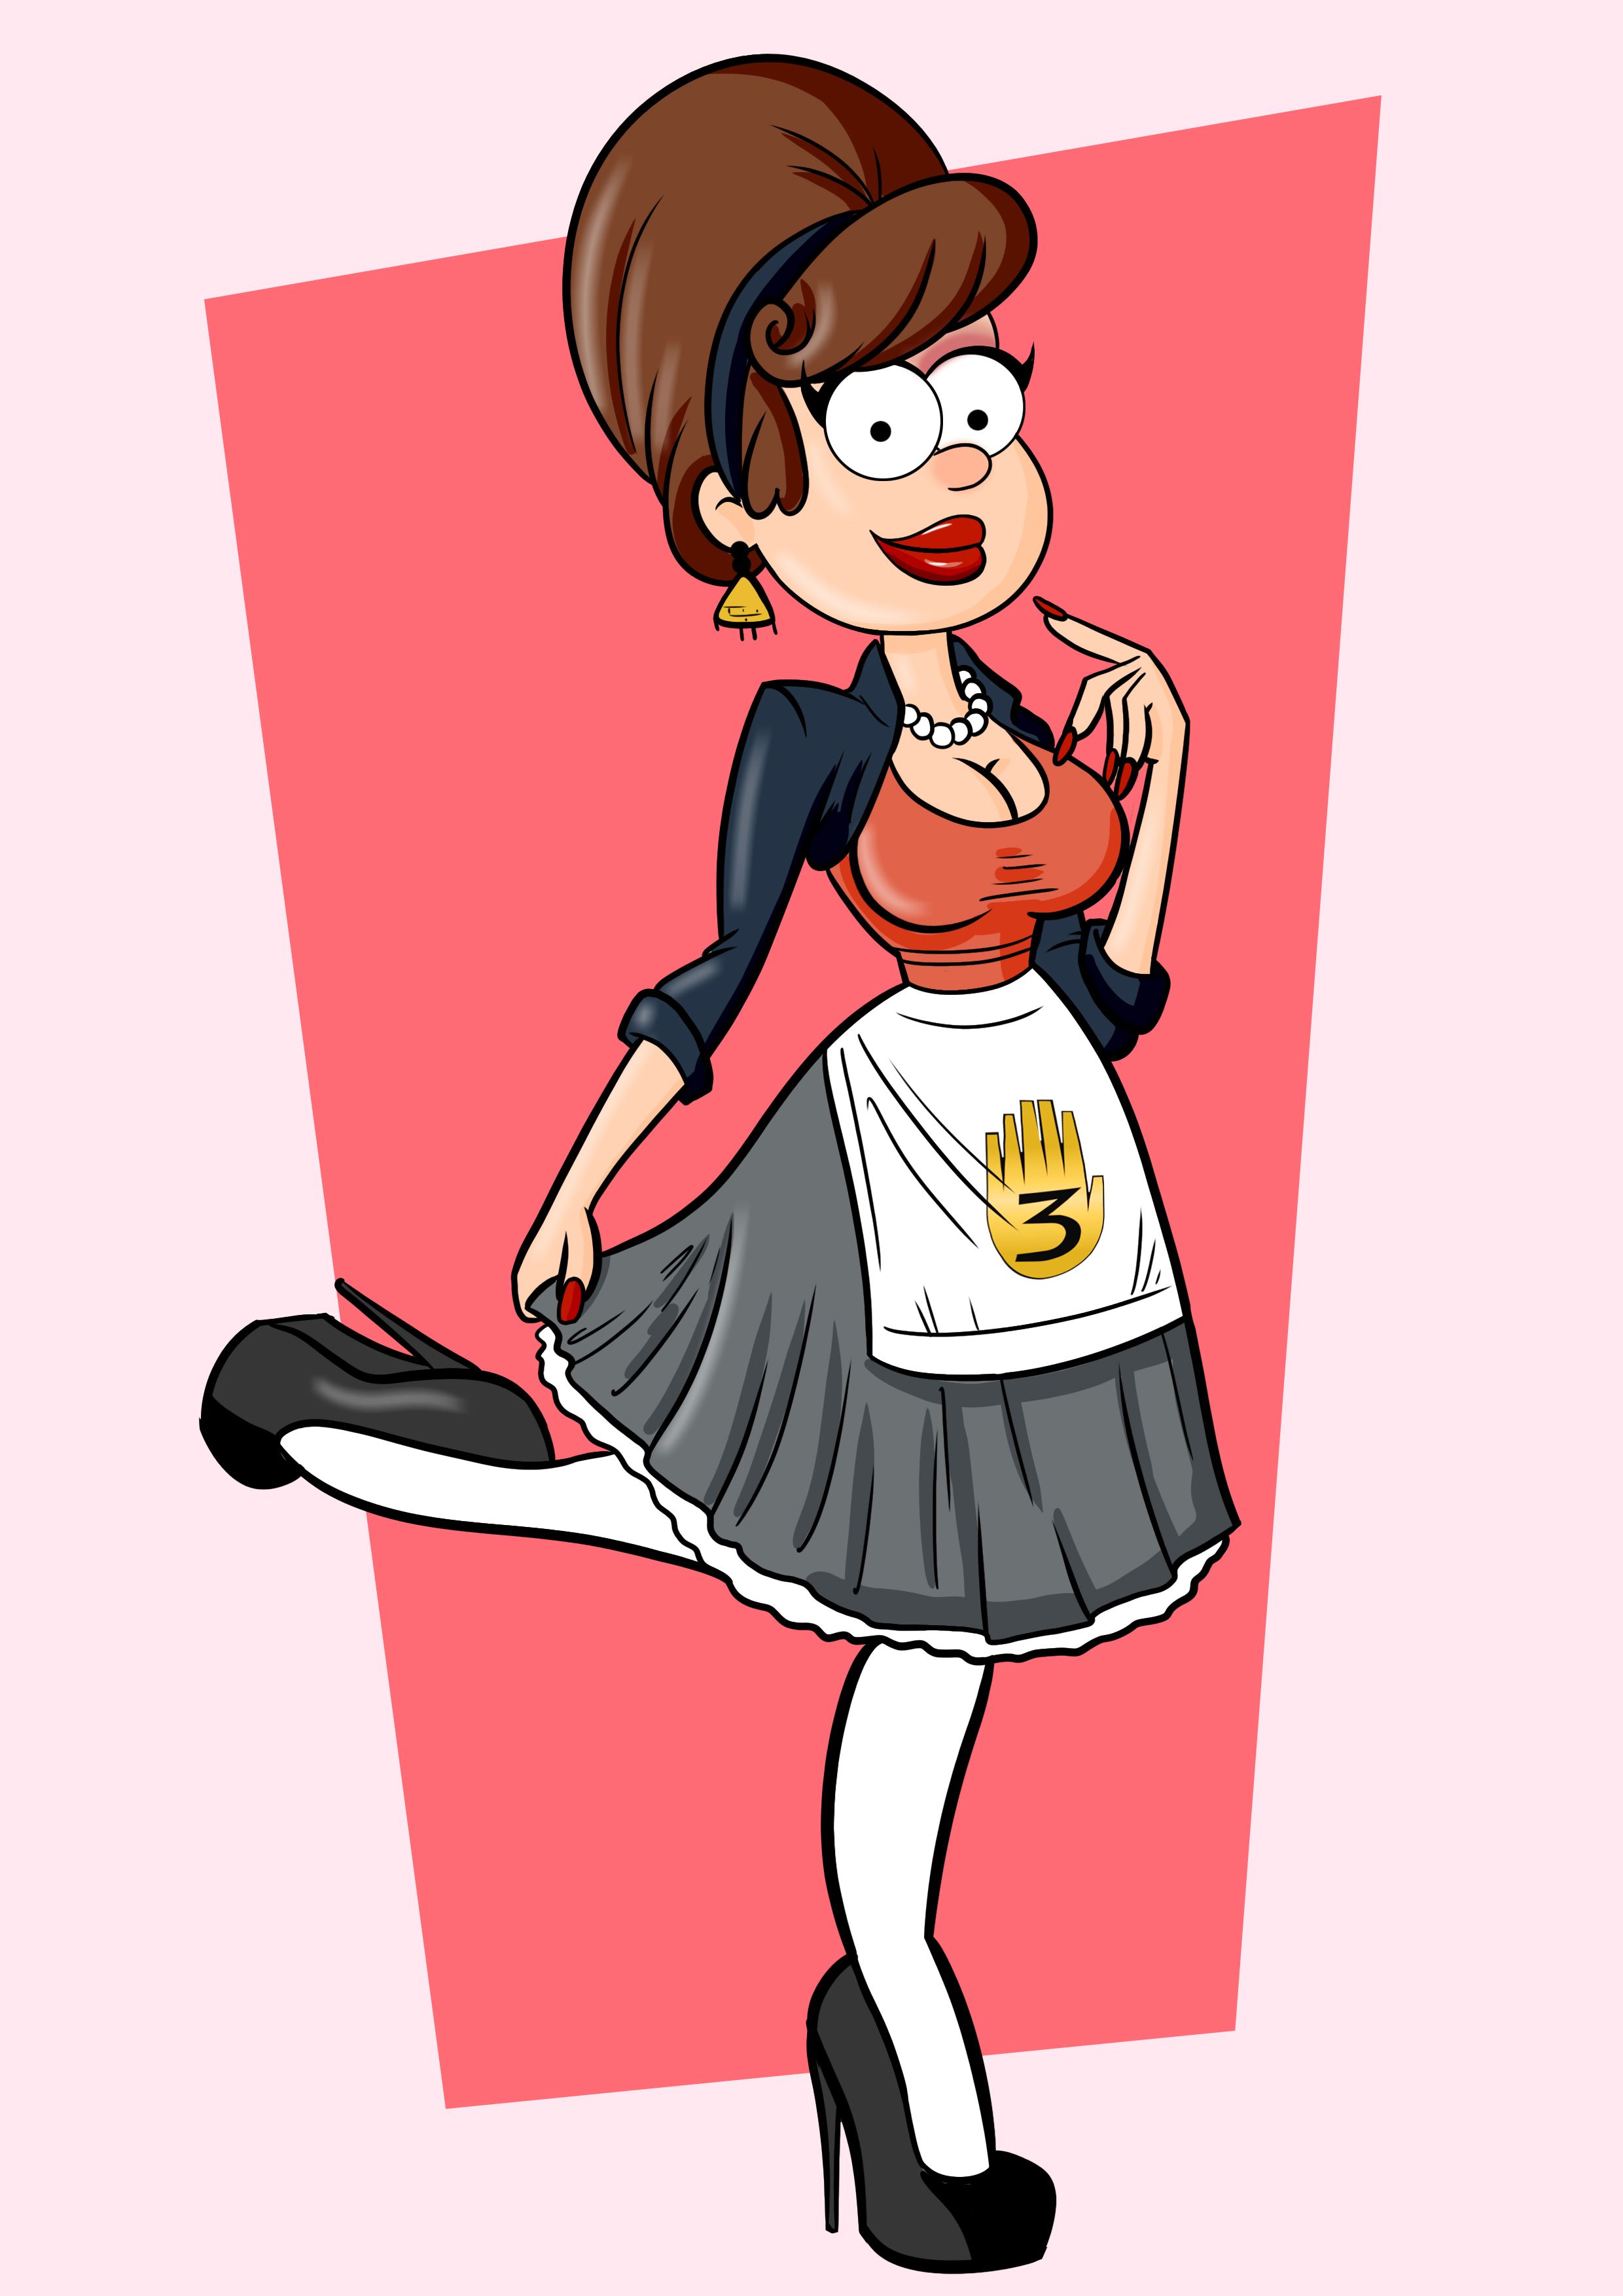 Dipper Pines TG Housewife.